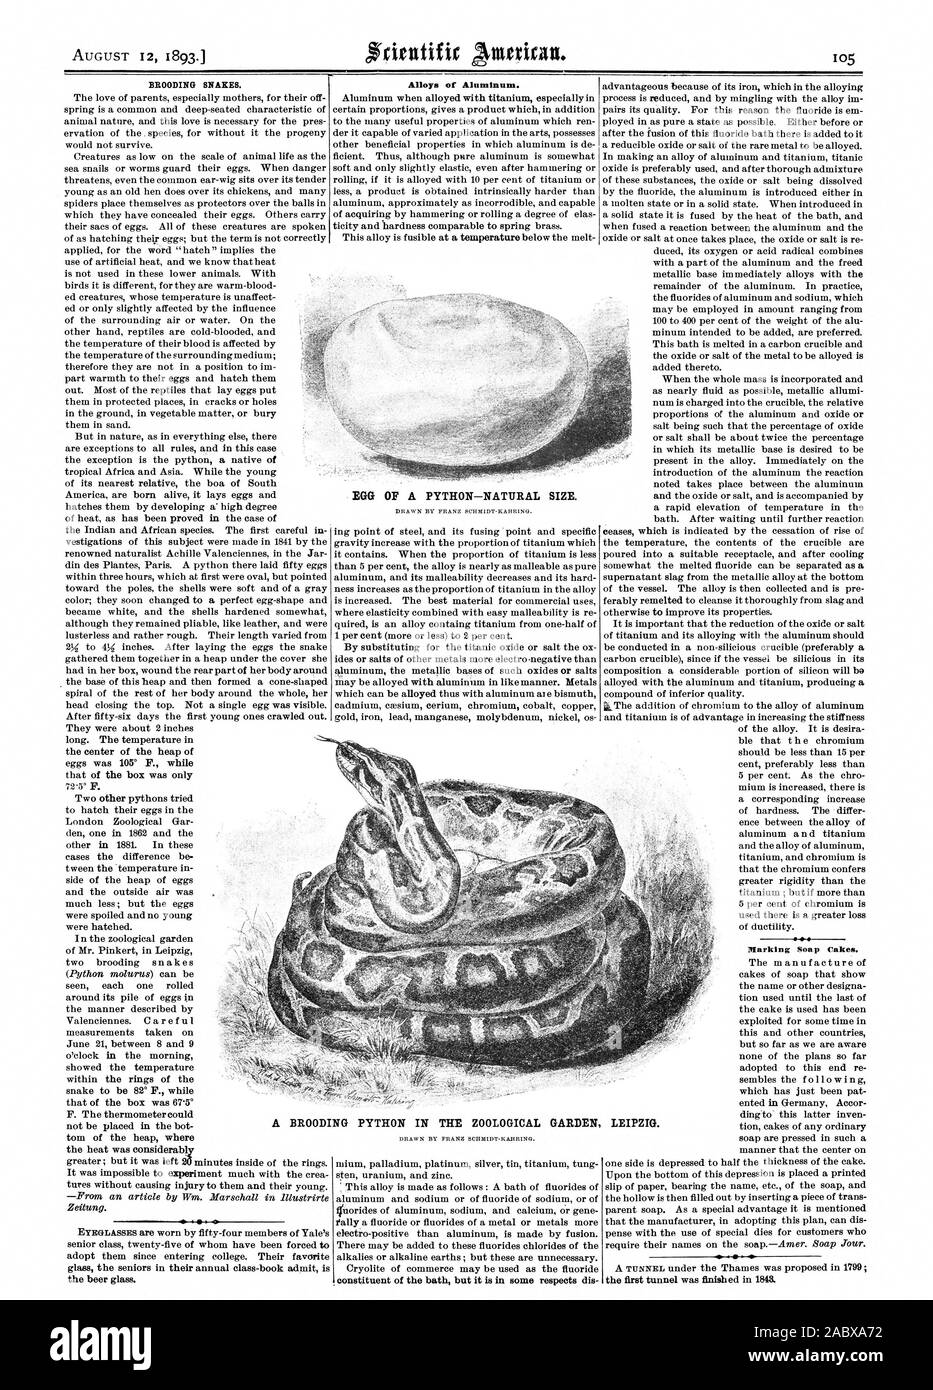 BROODING SNAKES. Alloys of Aluminum. Marking Soap Cakes. EGG OF A PYTHON—NATURAL SIZE. A BROODING PYTHON IN THE ZOOLOGICAL GARDEN LEIPZIG., scientific american, 1893-08-12 Stock Photo